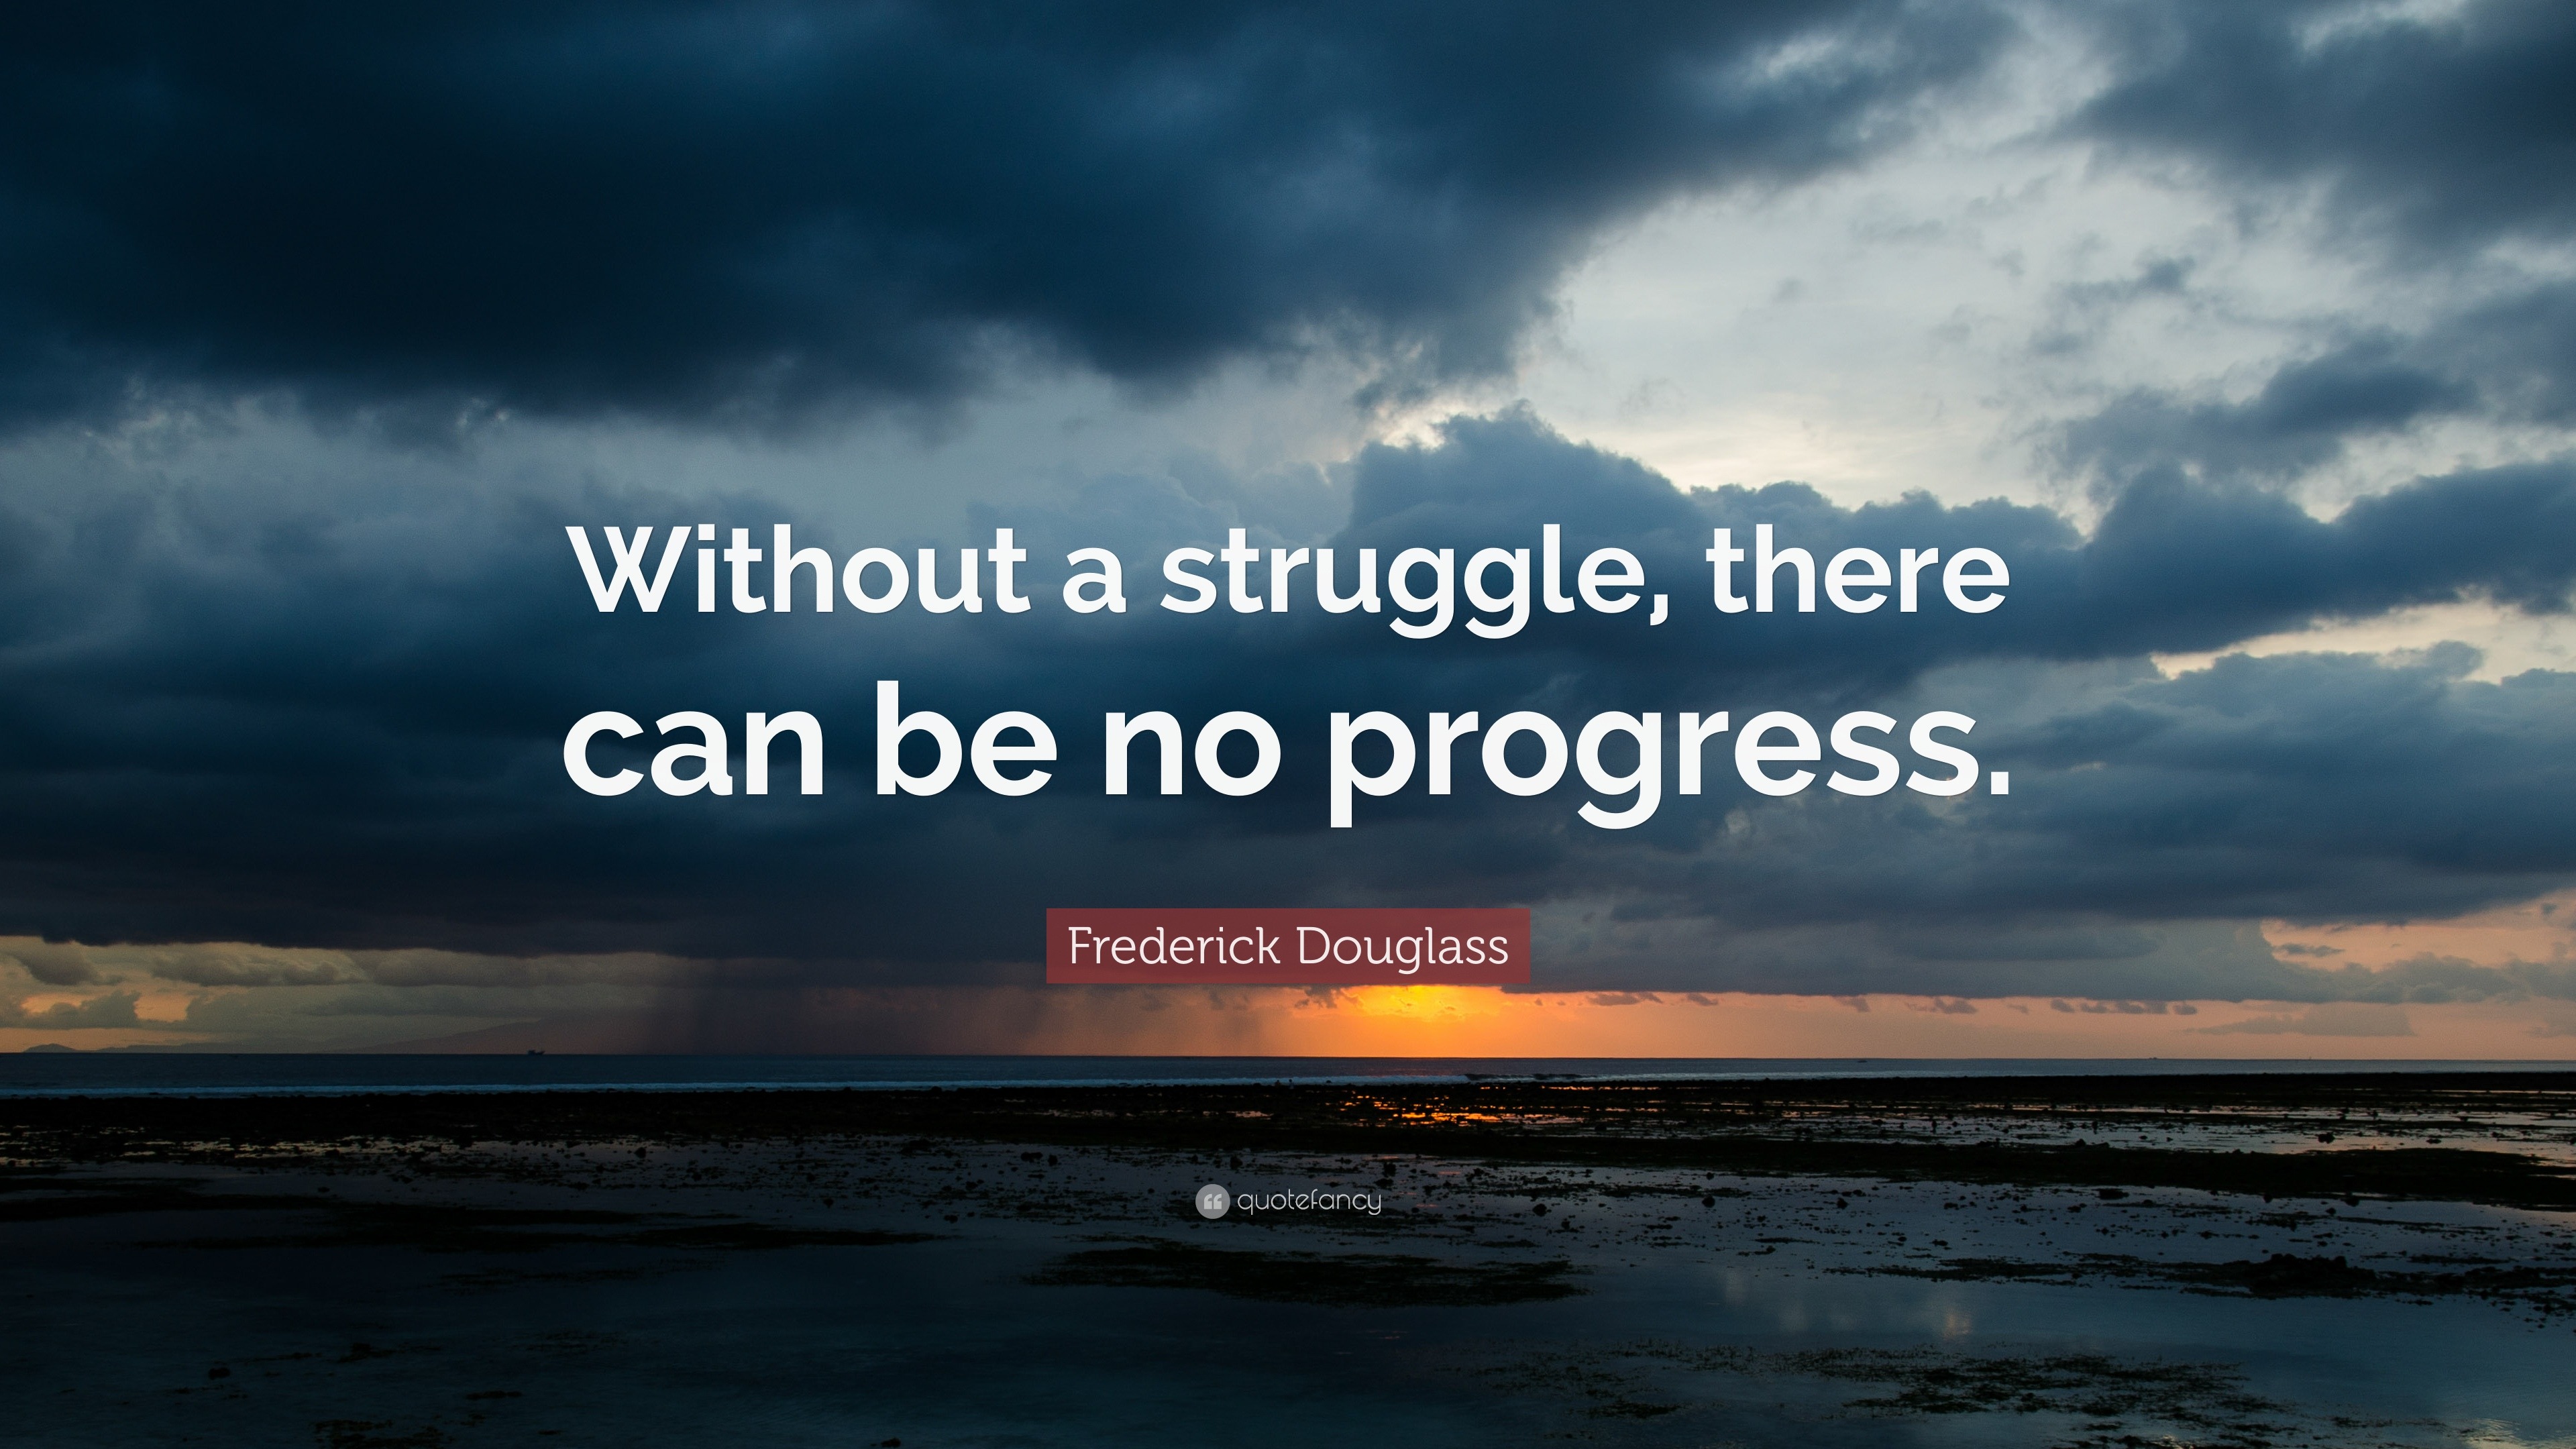 Frederick Douglass Quote: “Without a struggle, there can be no progress.”